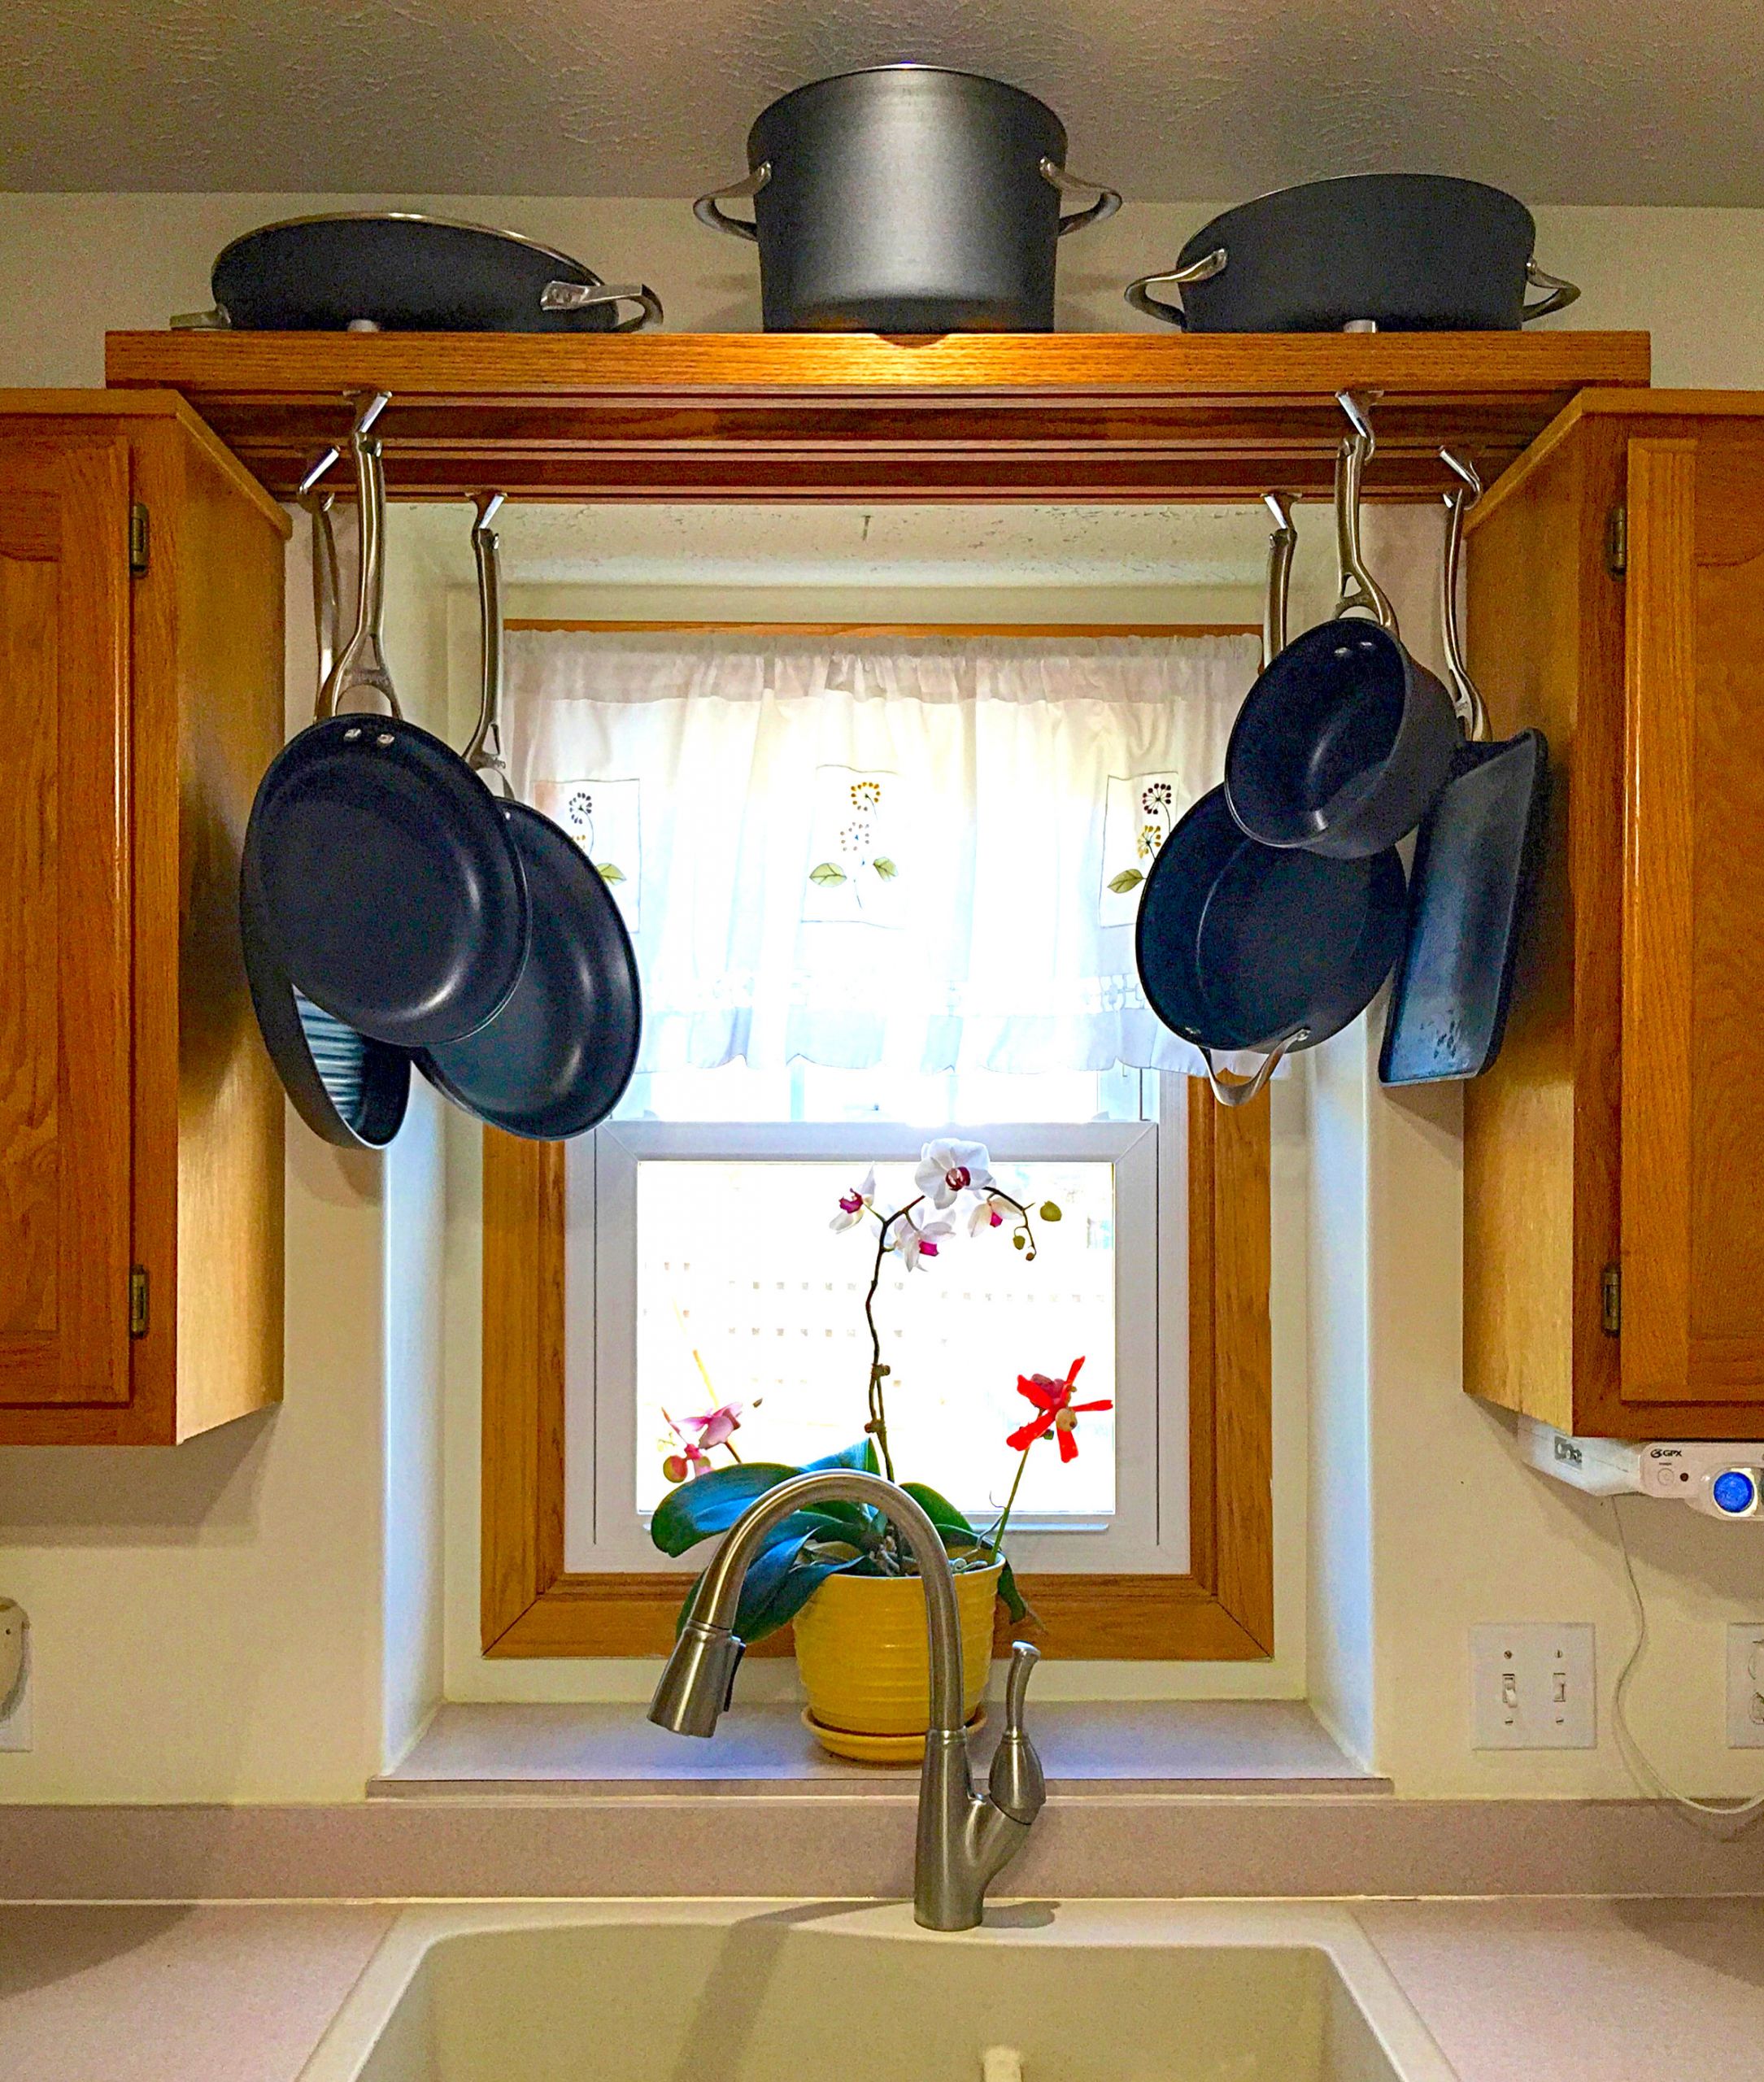 DIY Hanging Pan Rack
 Make use of space over the kitchen sink with this DIY pot